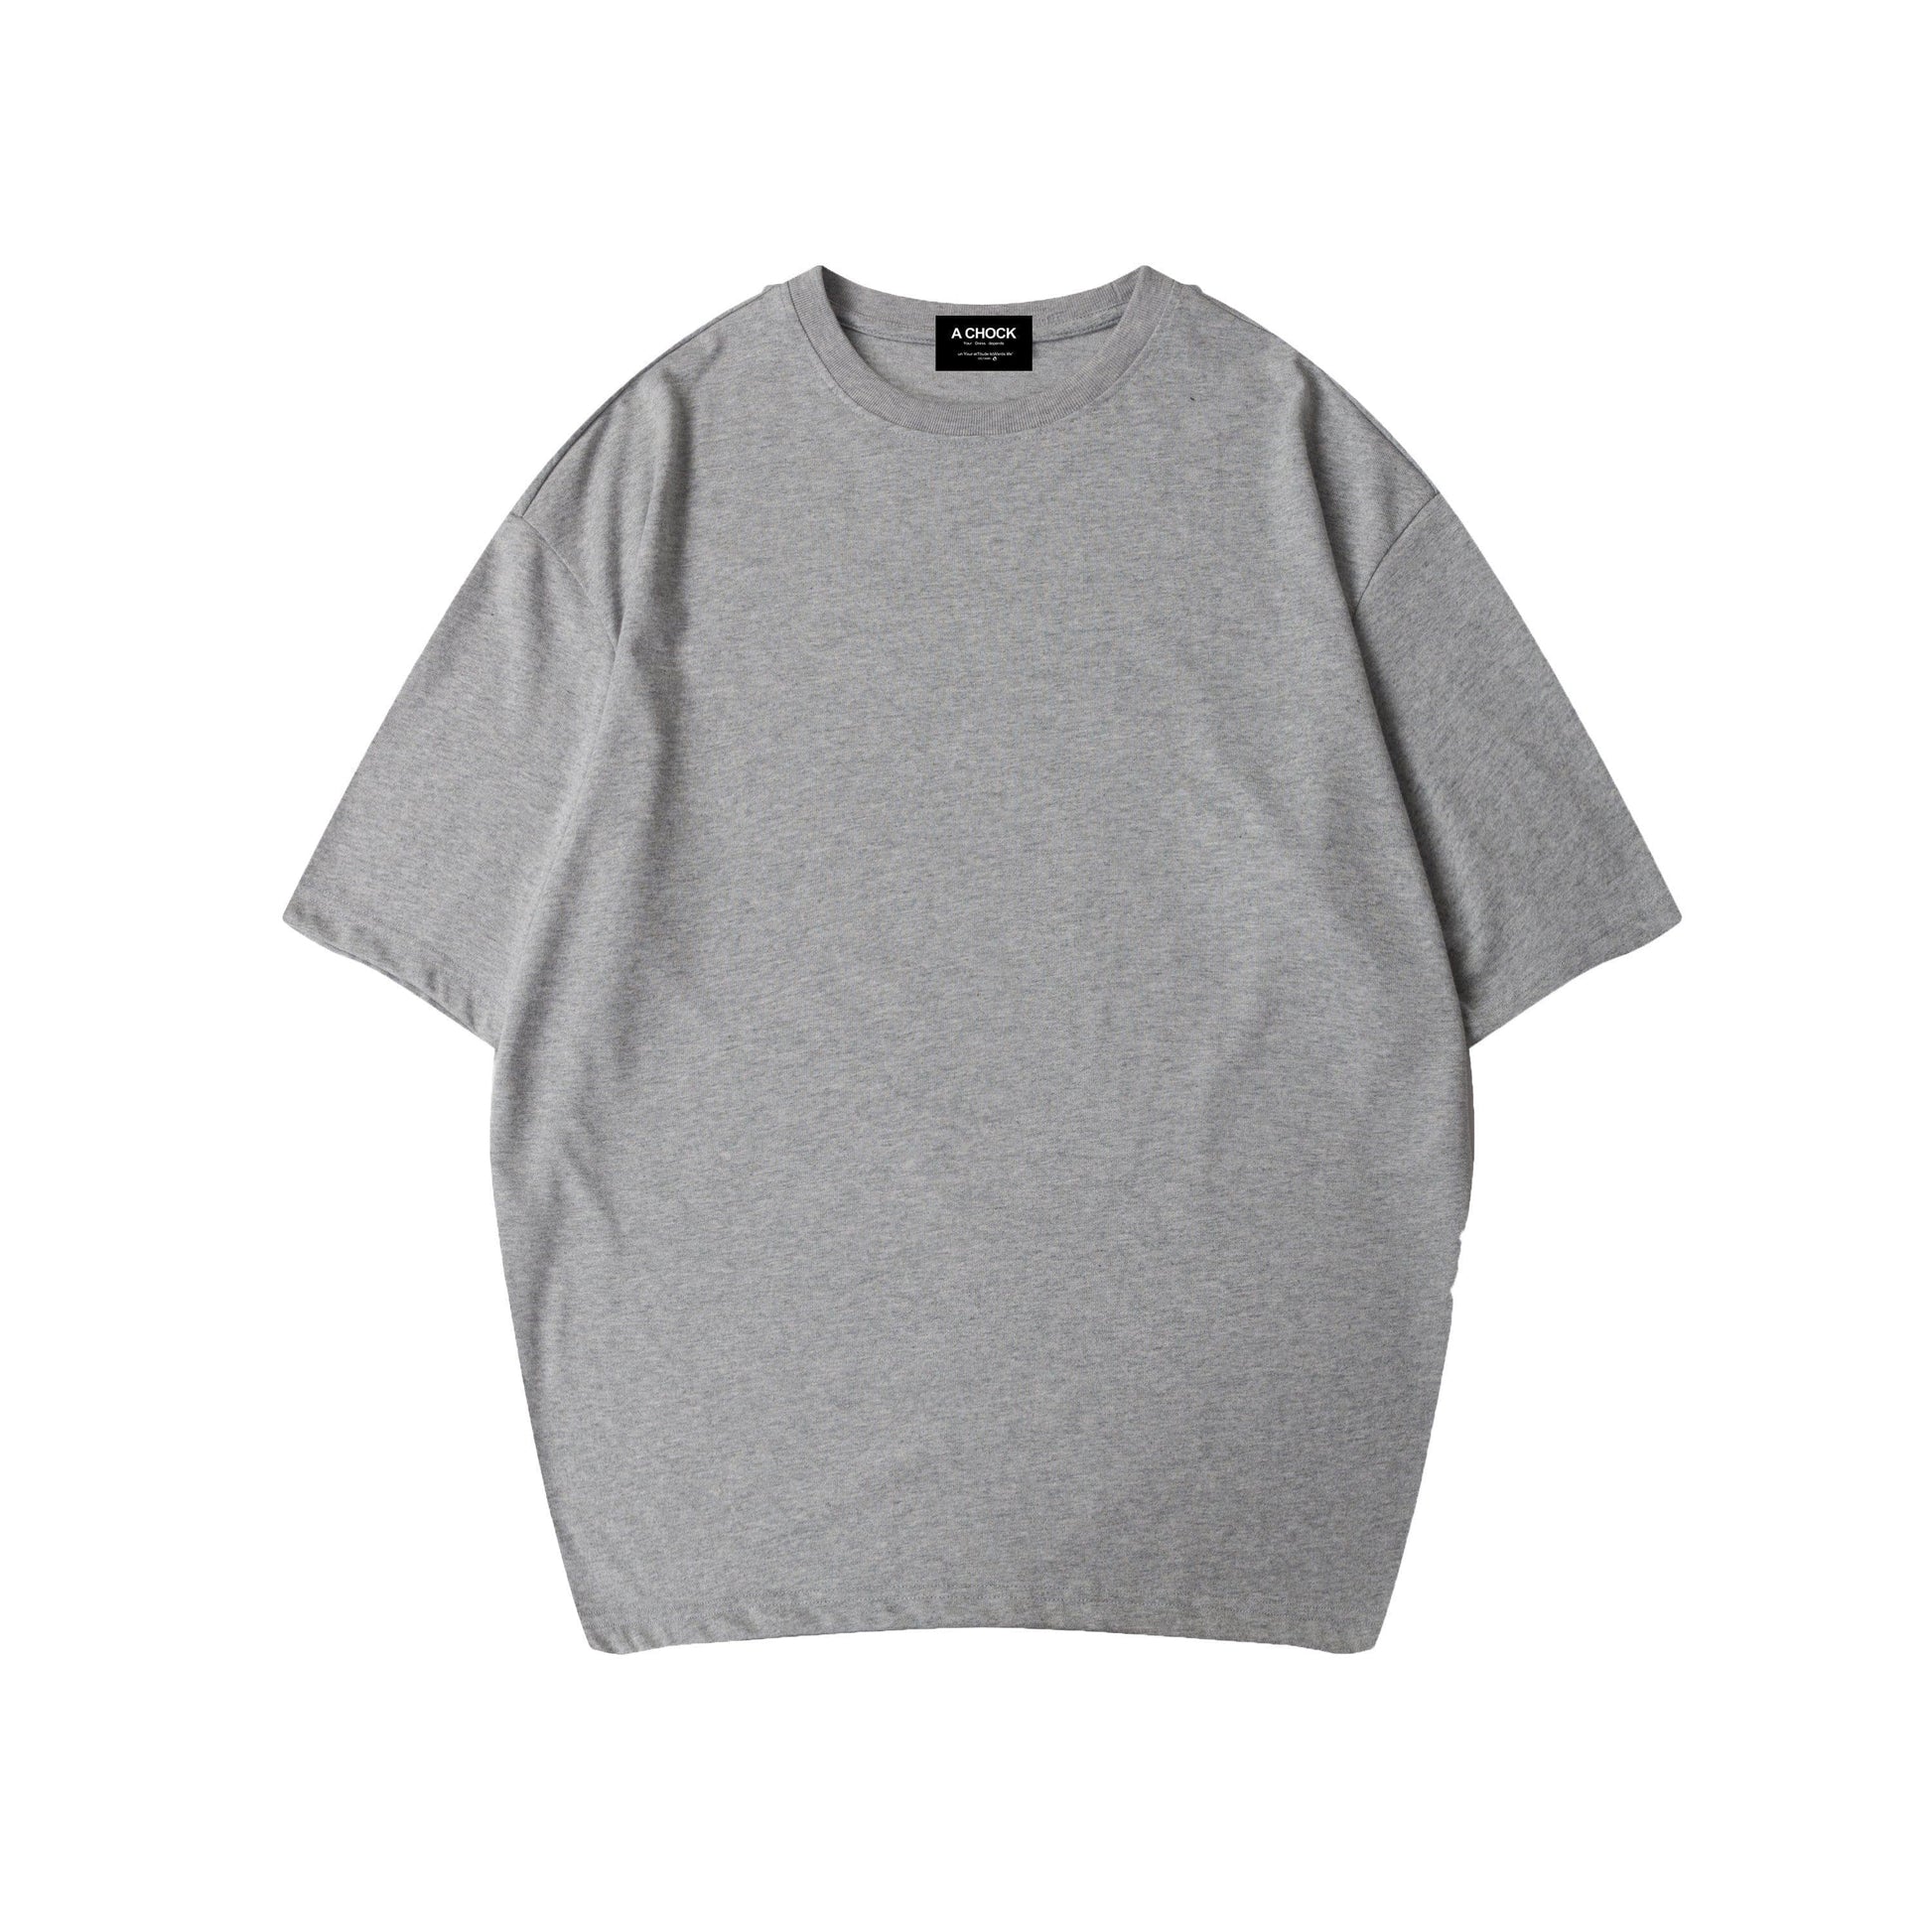 ezy2find T Shirt Grey / XL Solid color short-sleeved T-shirt bottoming shirt